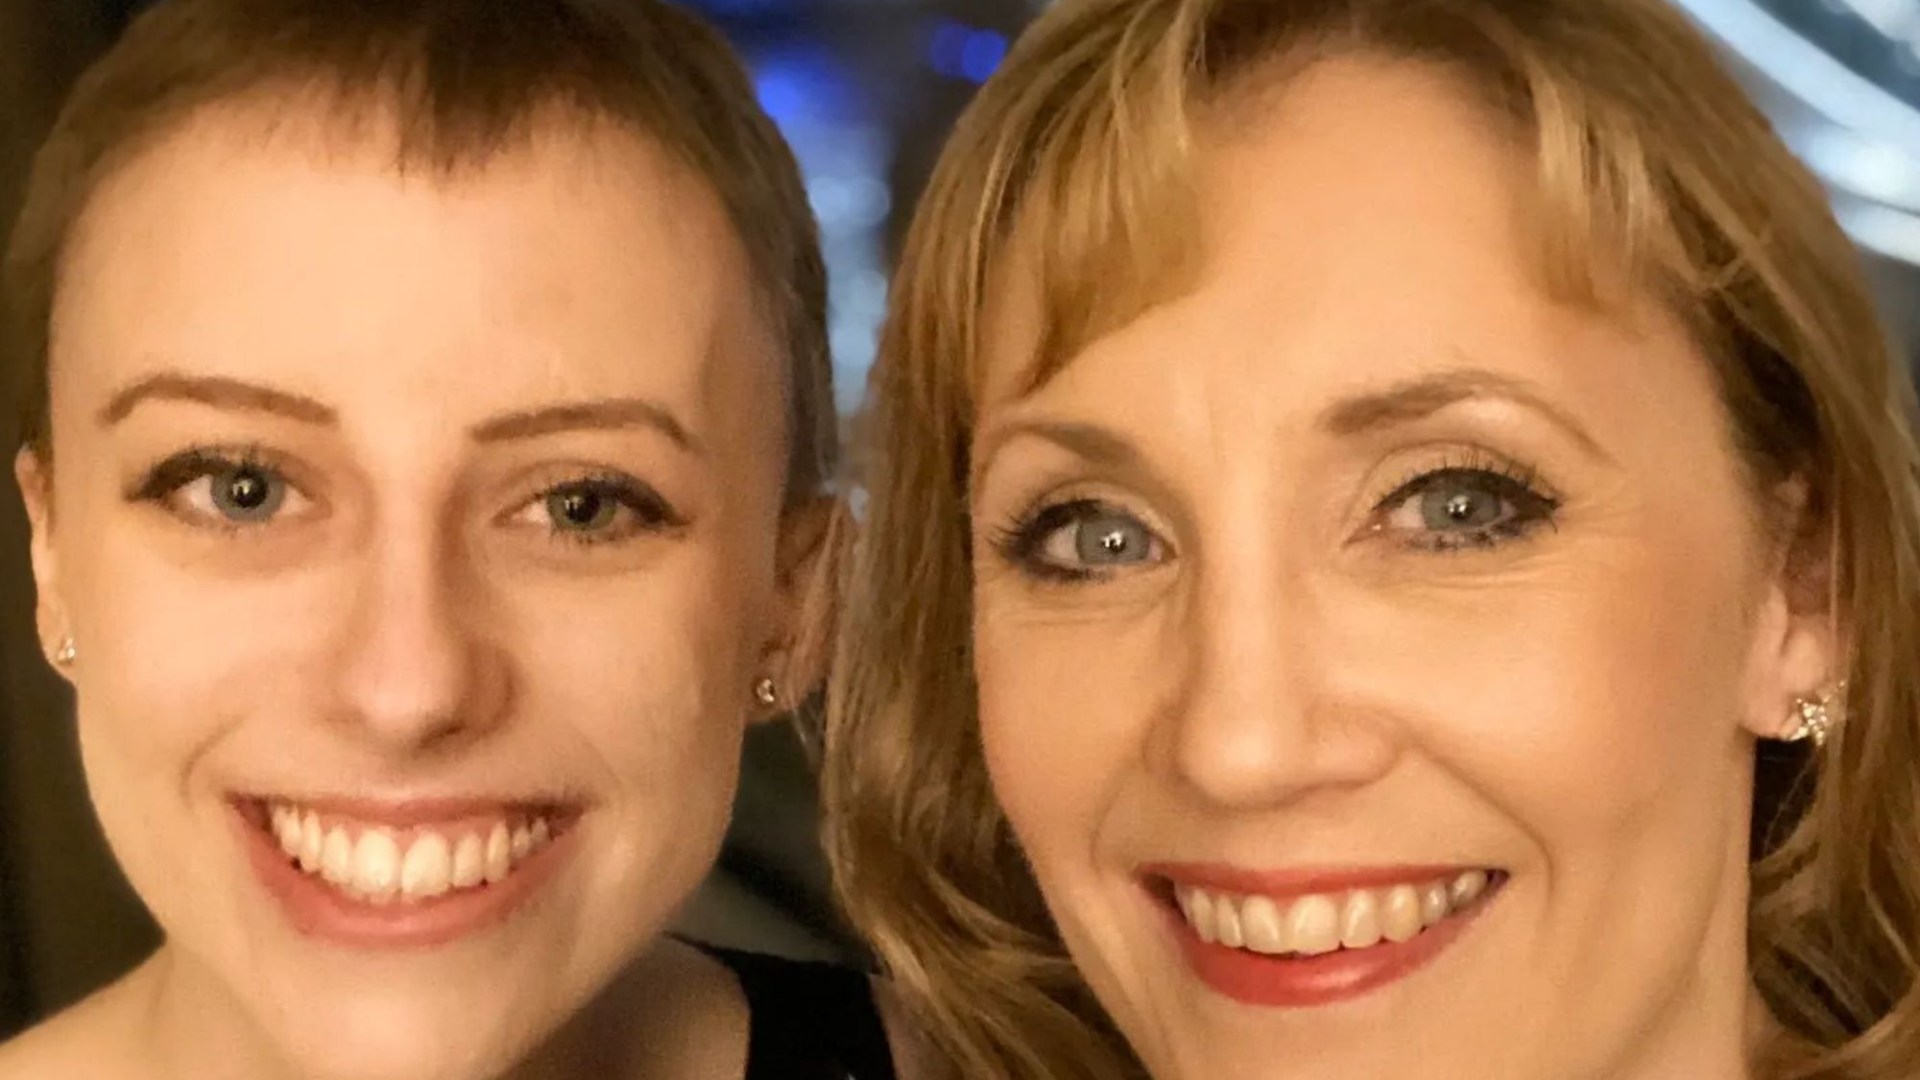 ‘I opened the window so her soul could leave’, mum’s heartbreaking diary of daughter’s brain cancer battle & bucket list [Video]